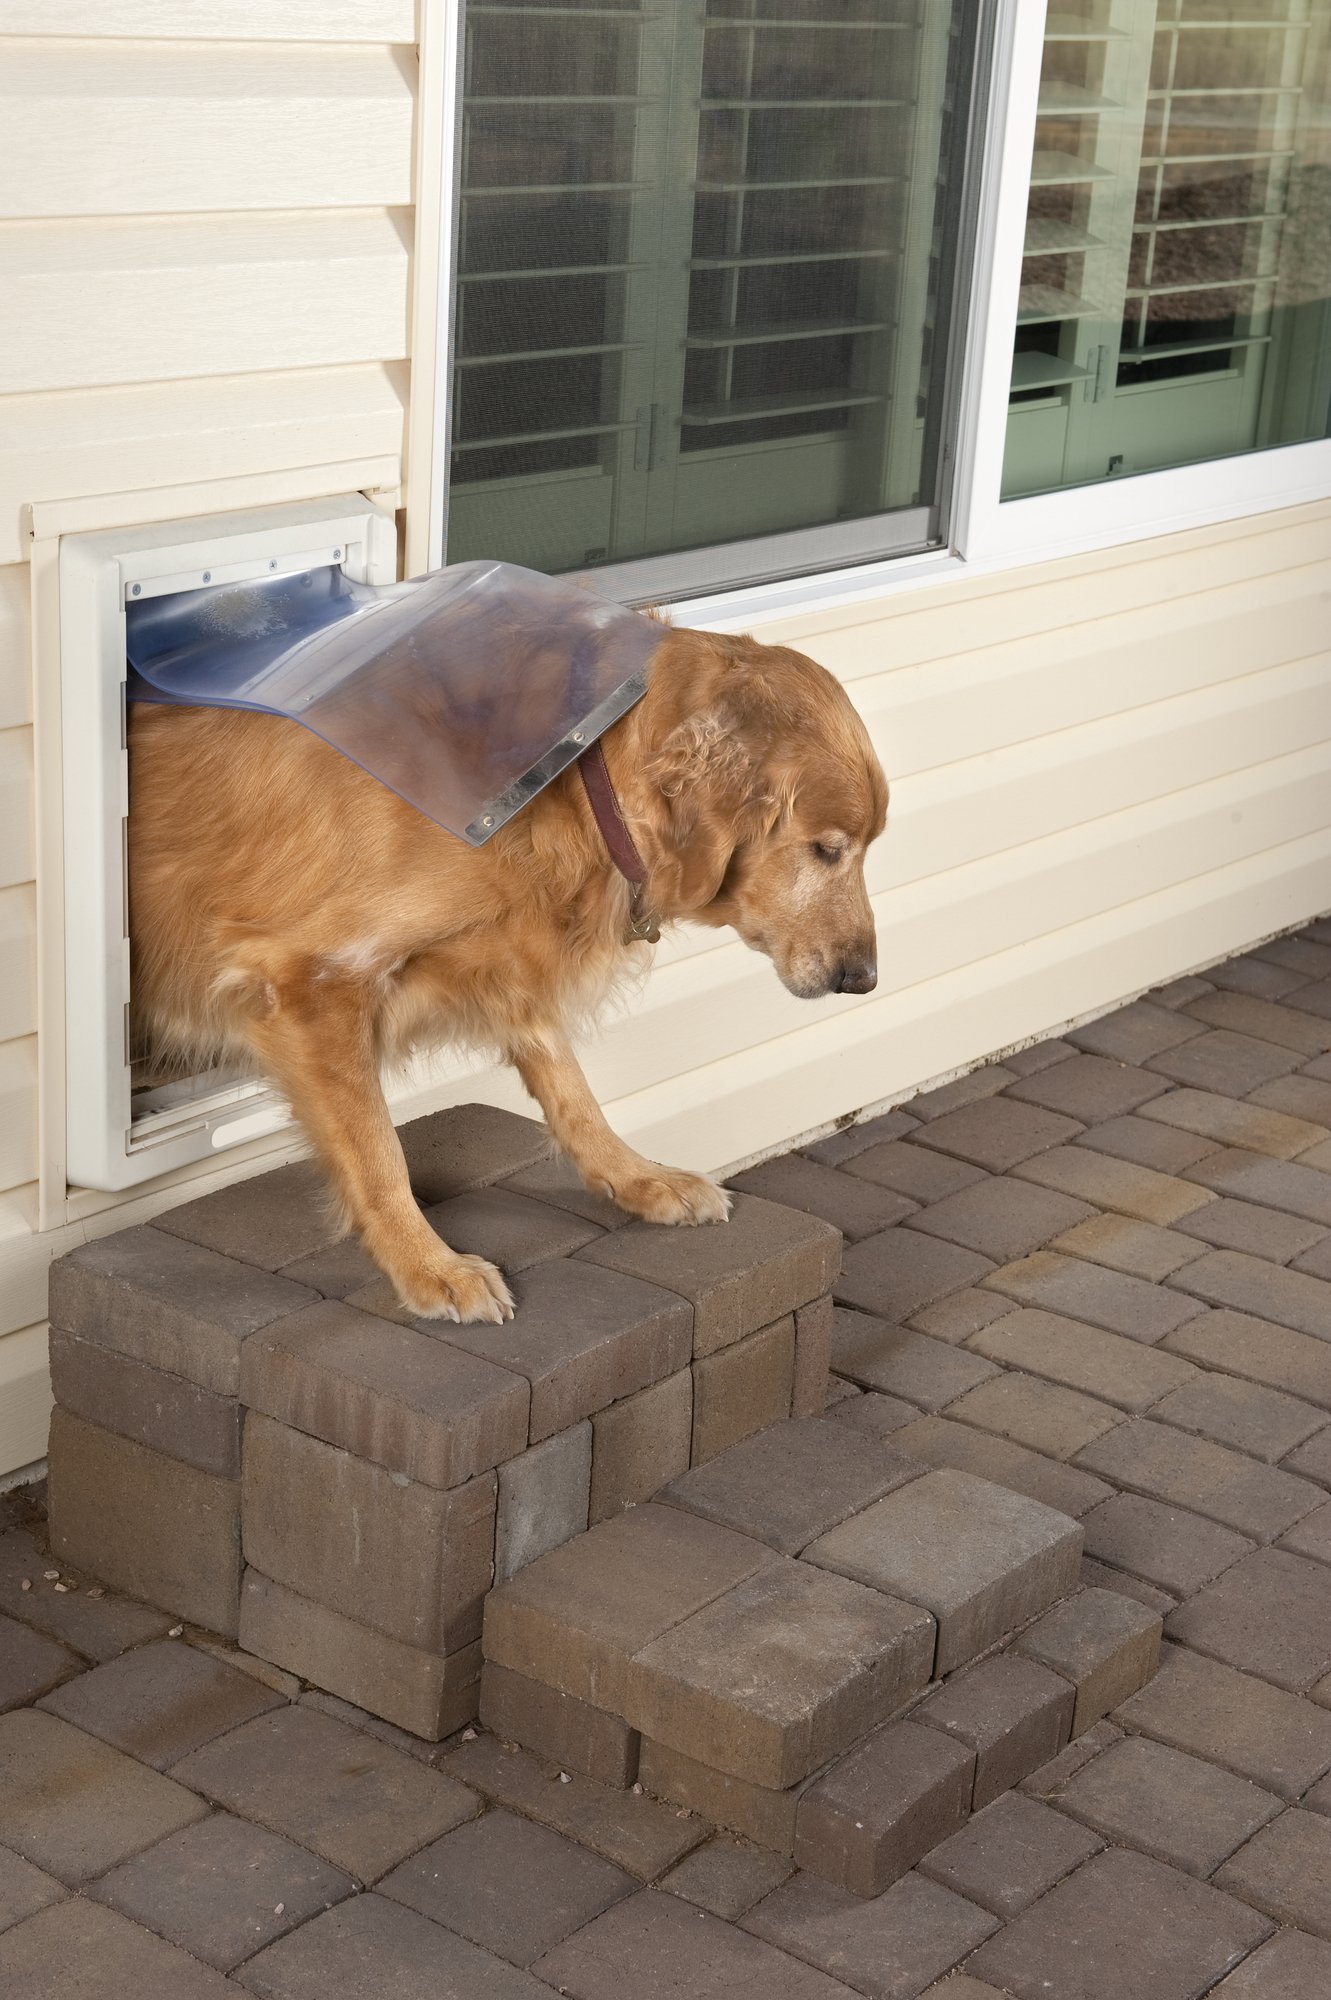 How To Train A Dog To Use A Dog Door